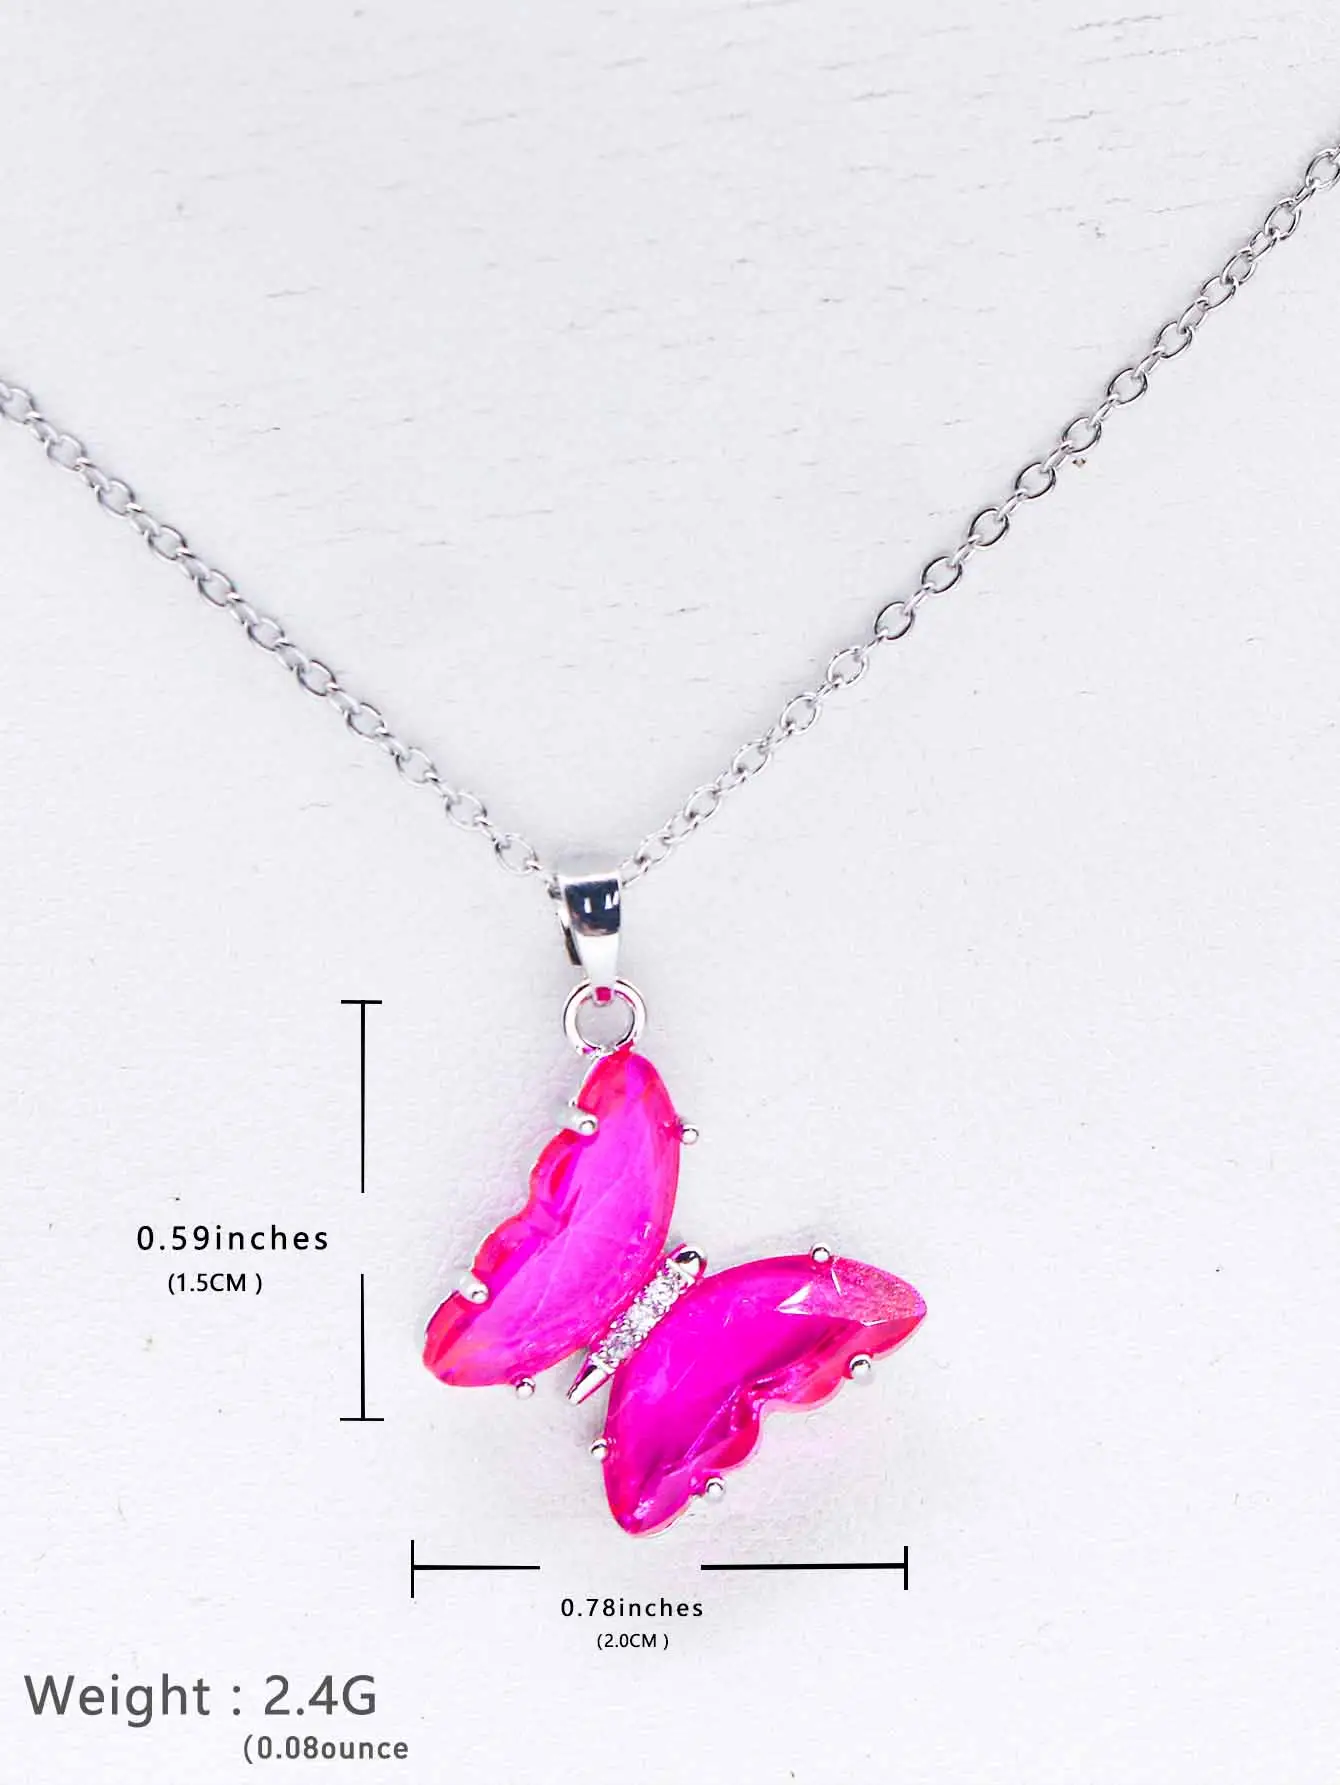 Women's Fashionable Copper Silver Butterfly Necklace Daily Worn Alloy Jewelry with Oval Cutting Diamond Shape Perfect Gift Idea